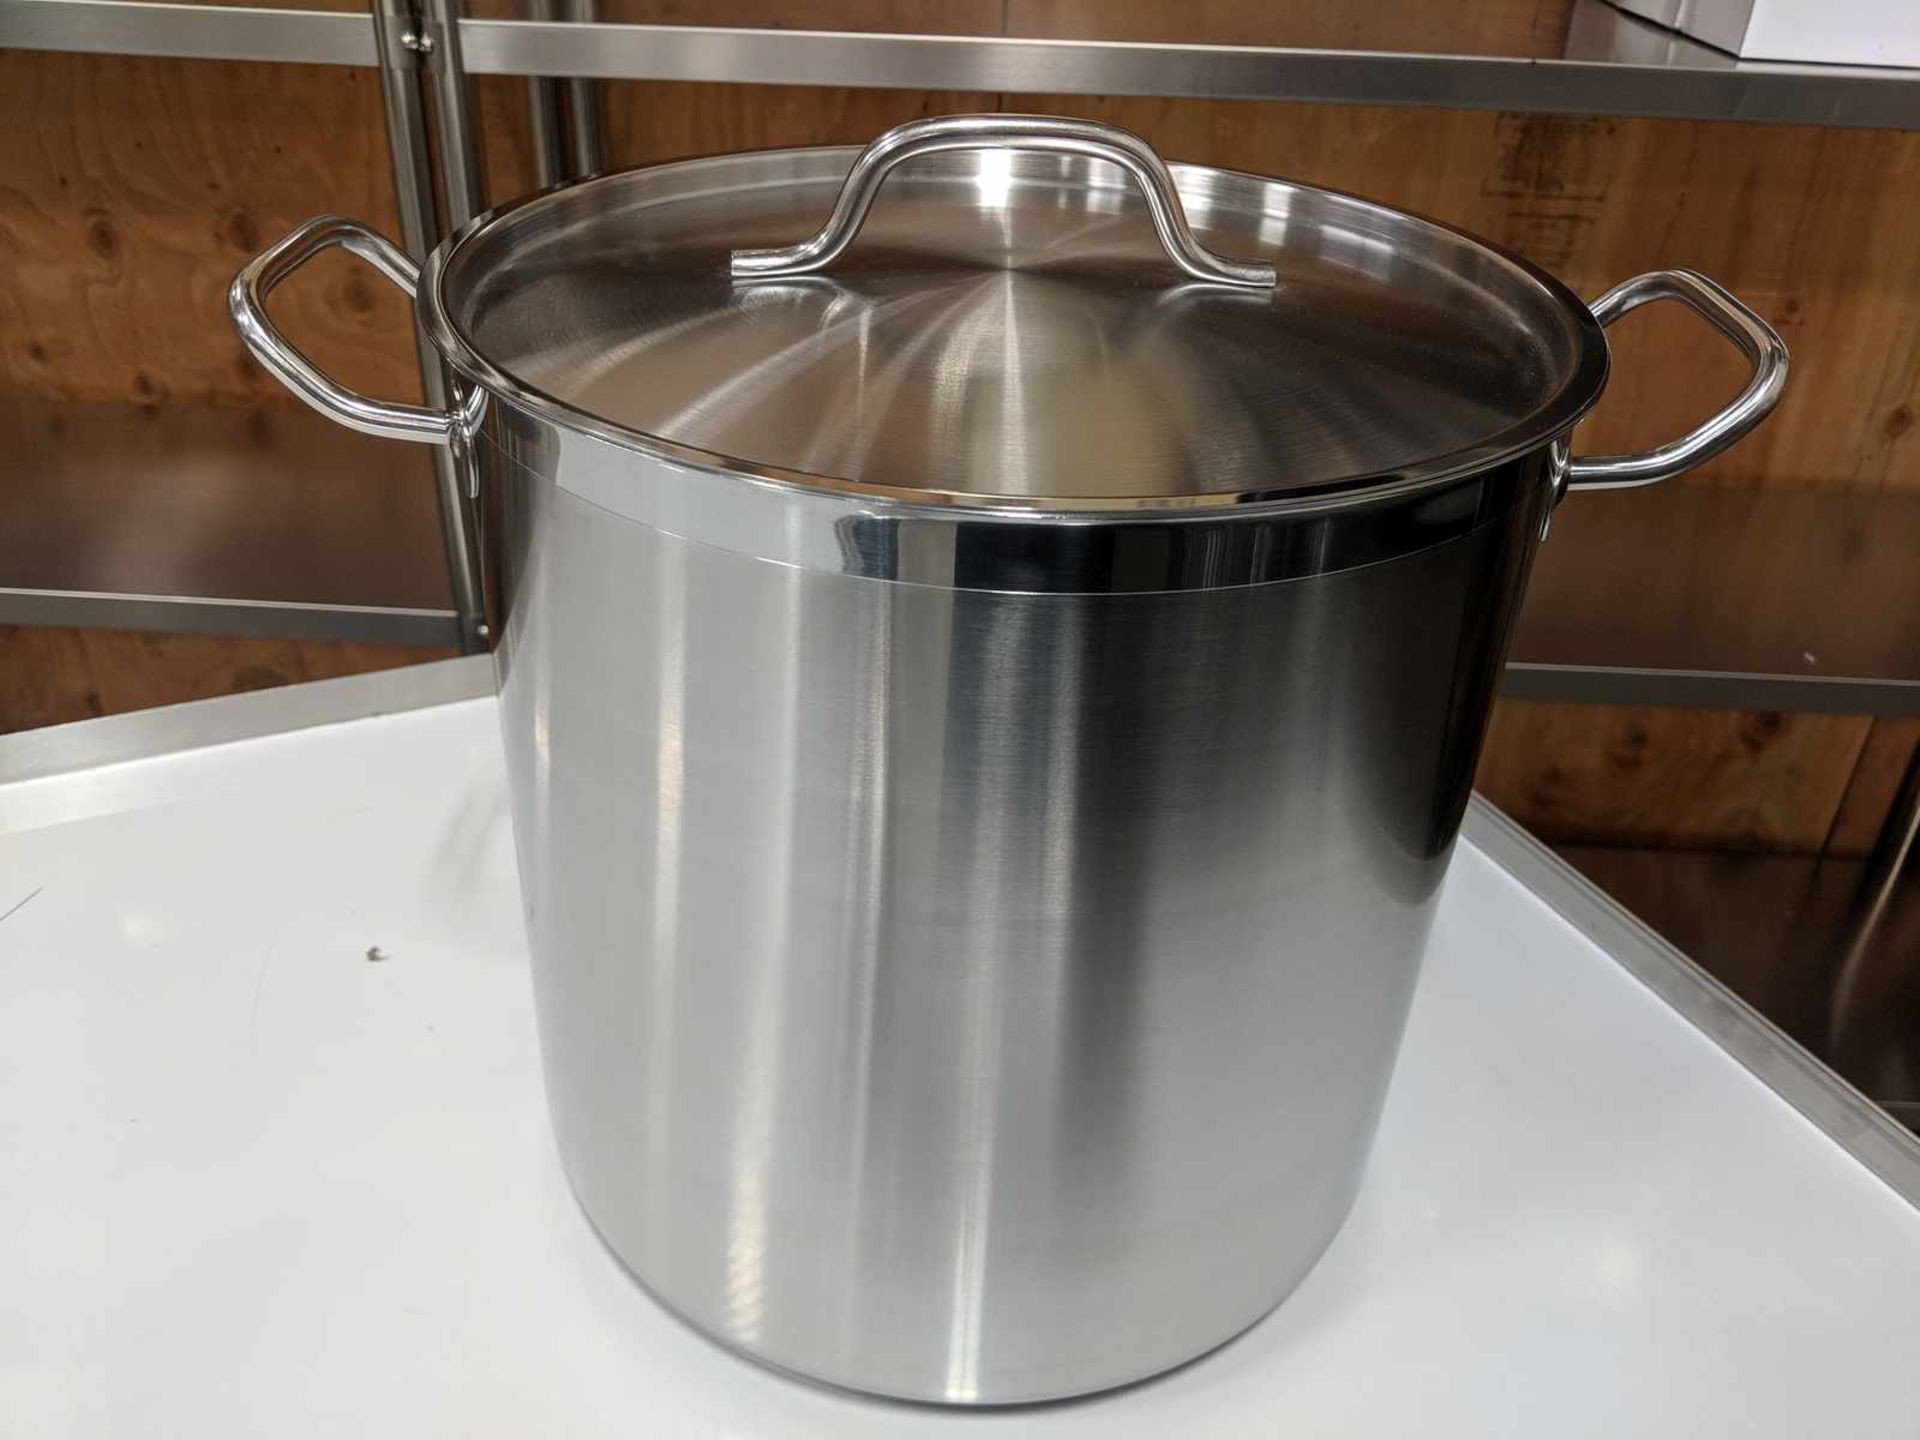 24qt Heavy Duty Stainless Stock Pot induction capable Johnson-Rose 47242 - Image 4 of 4